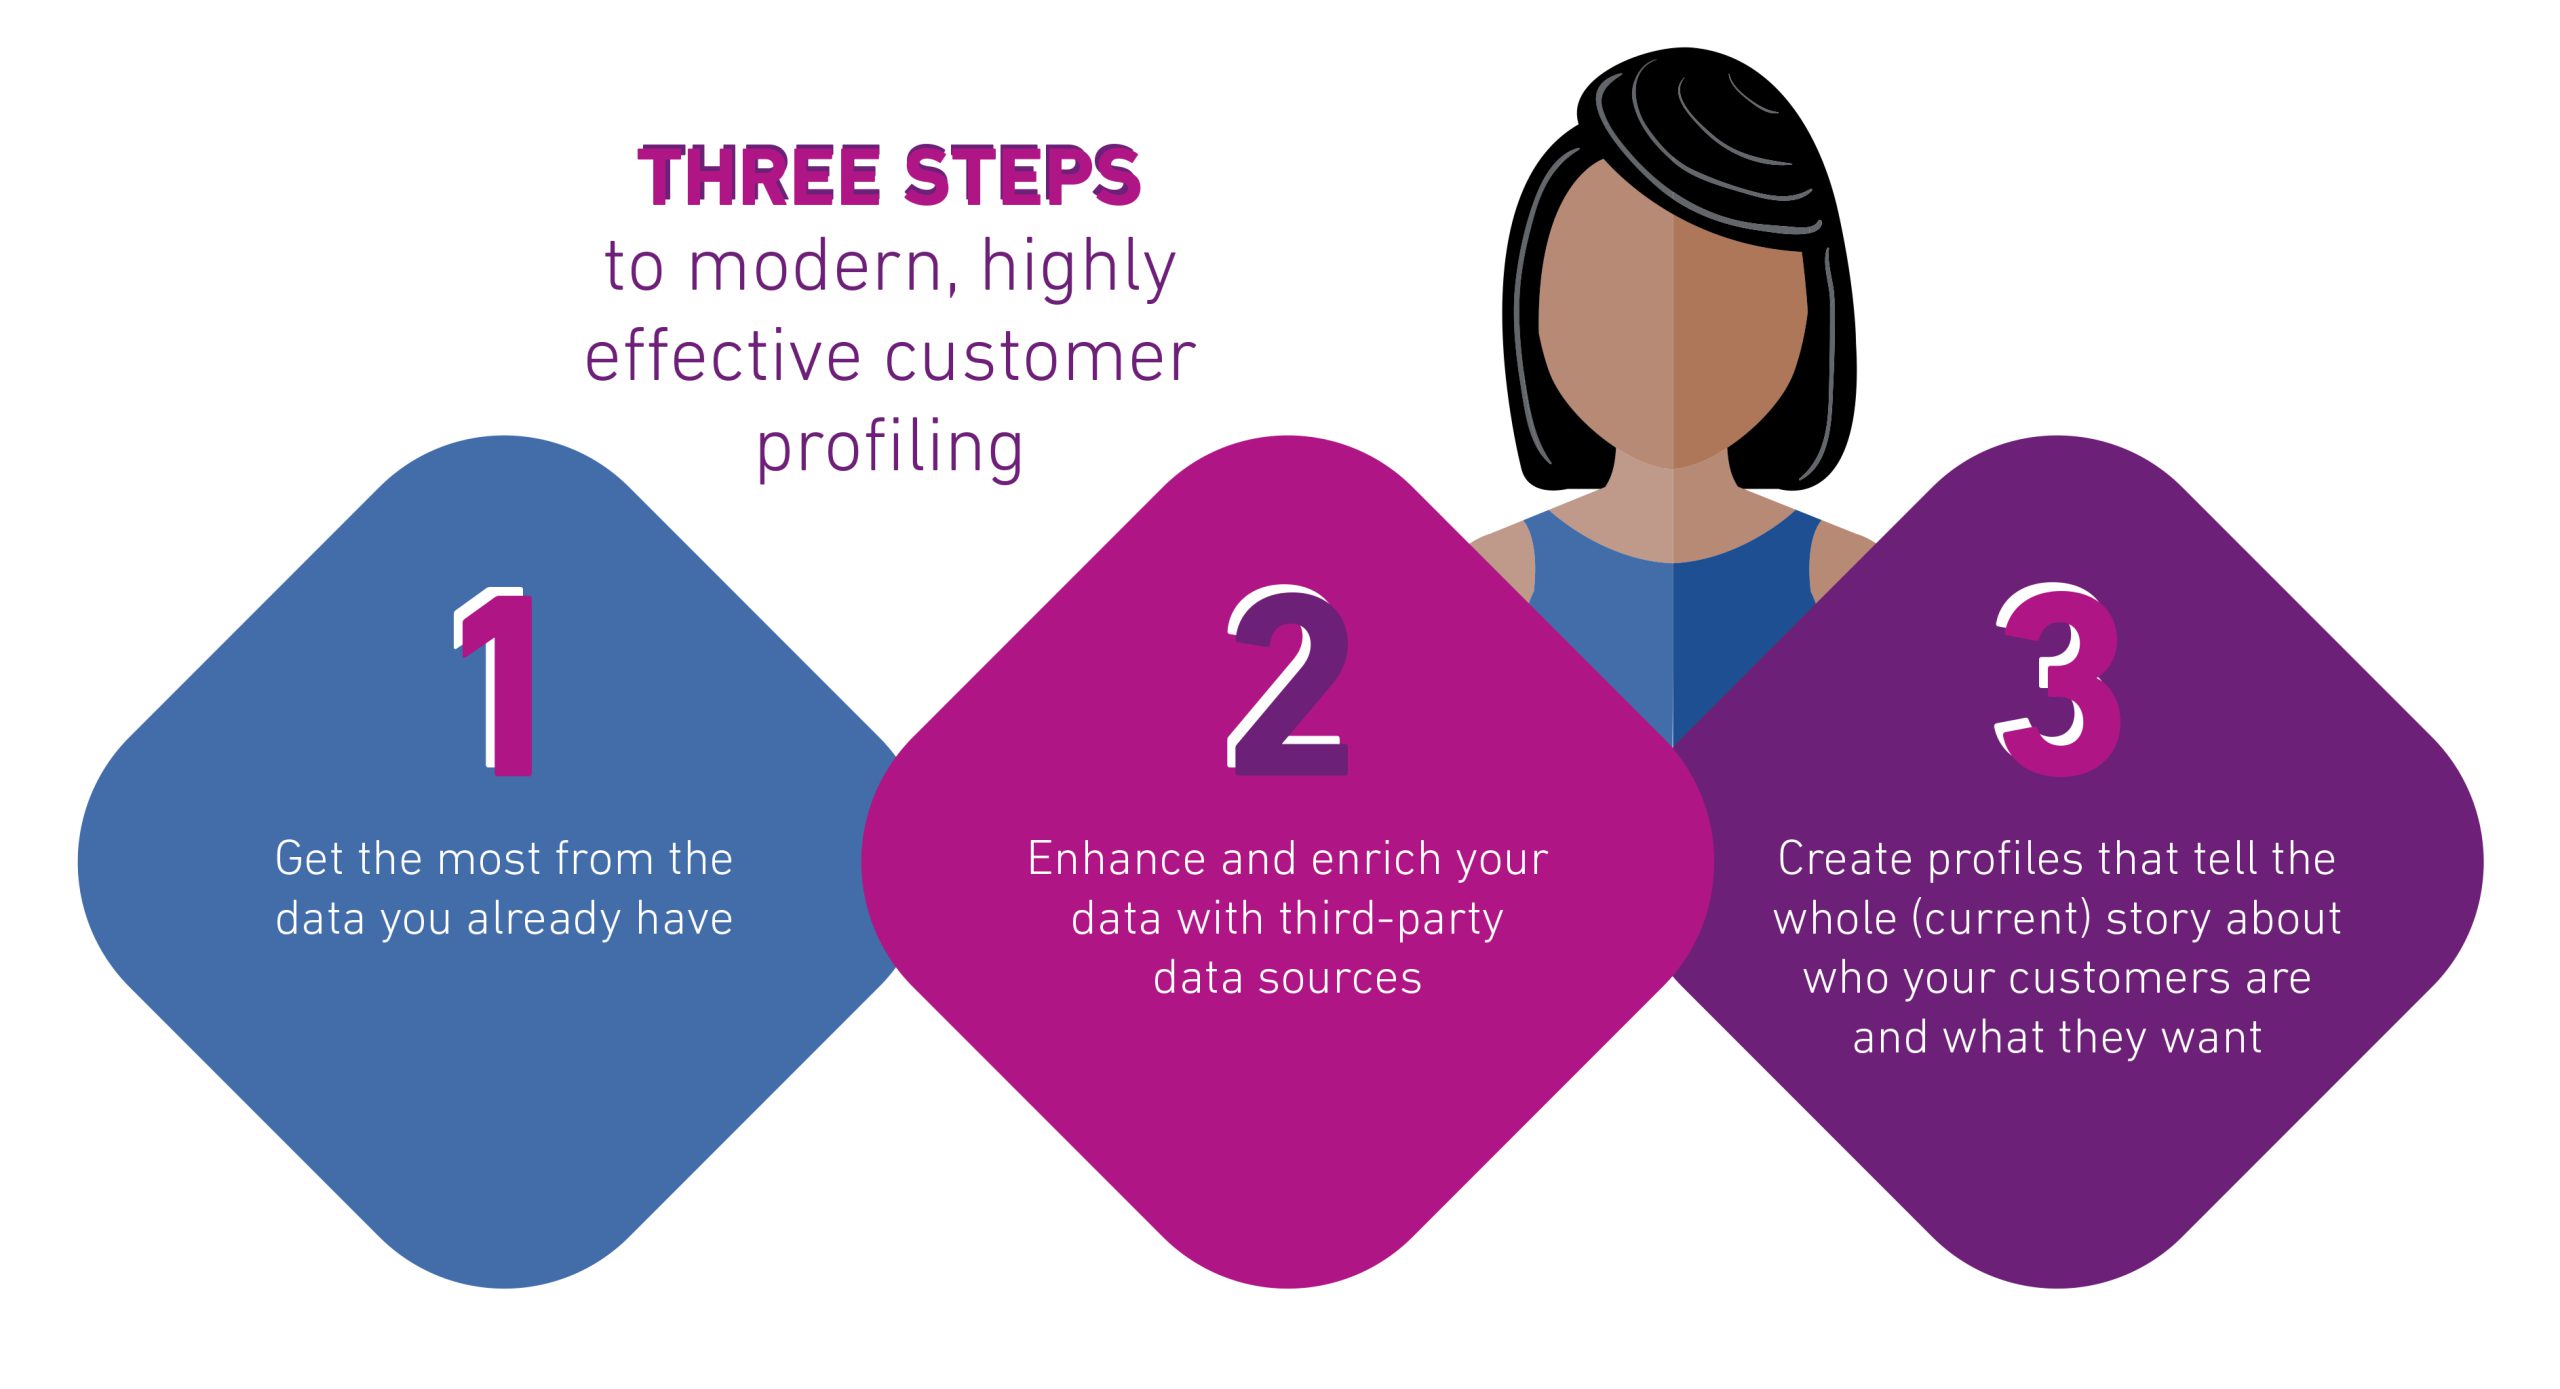 Three steps to modern, highly effective customer profiling infographic